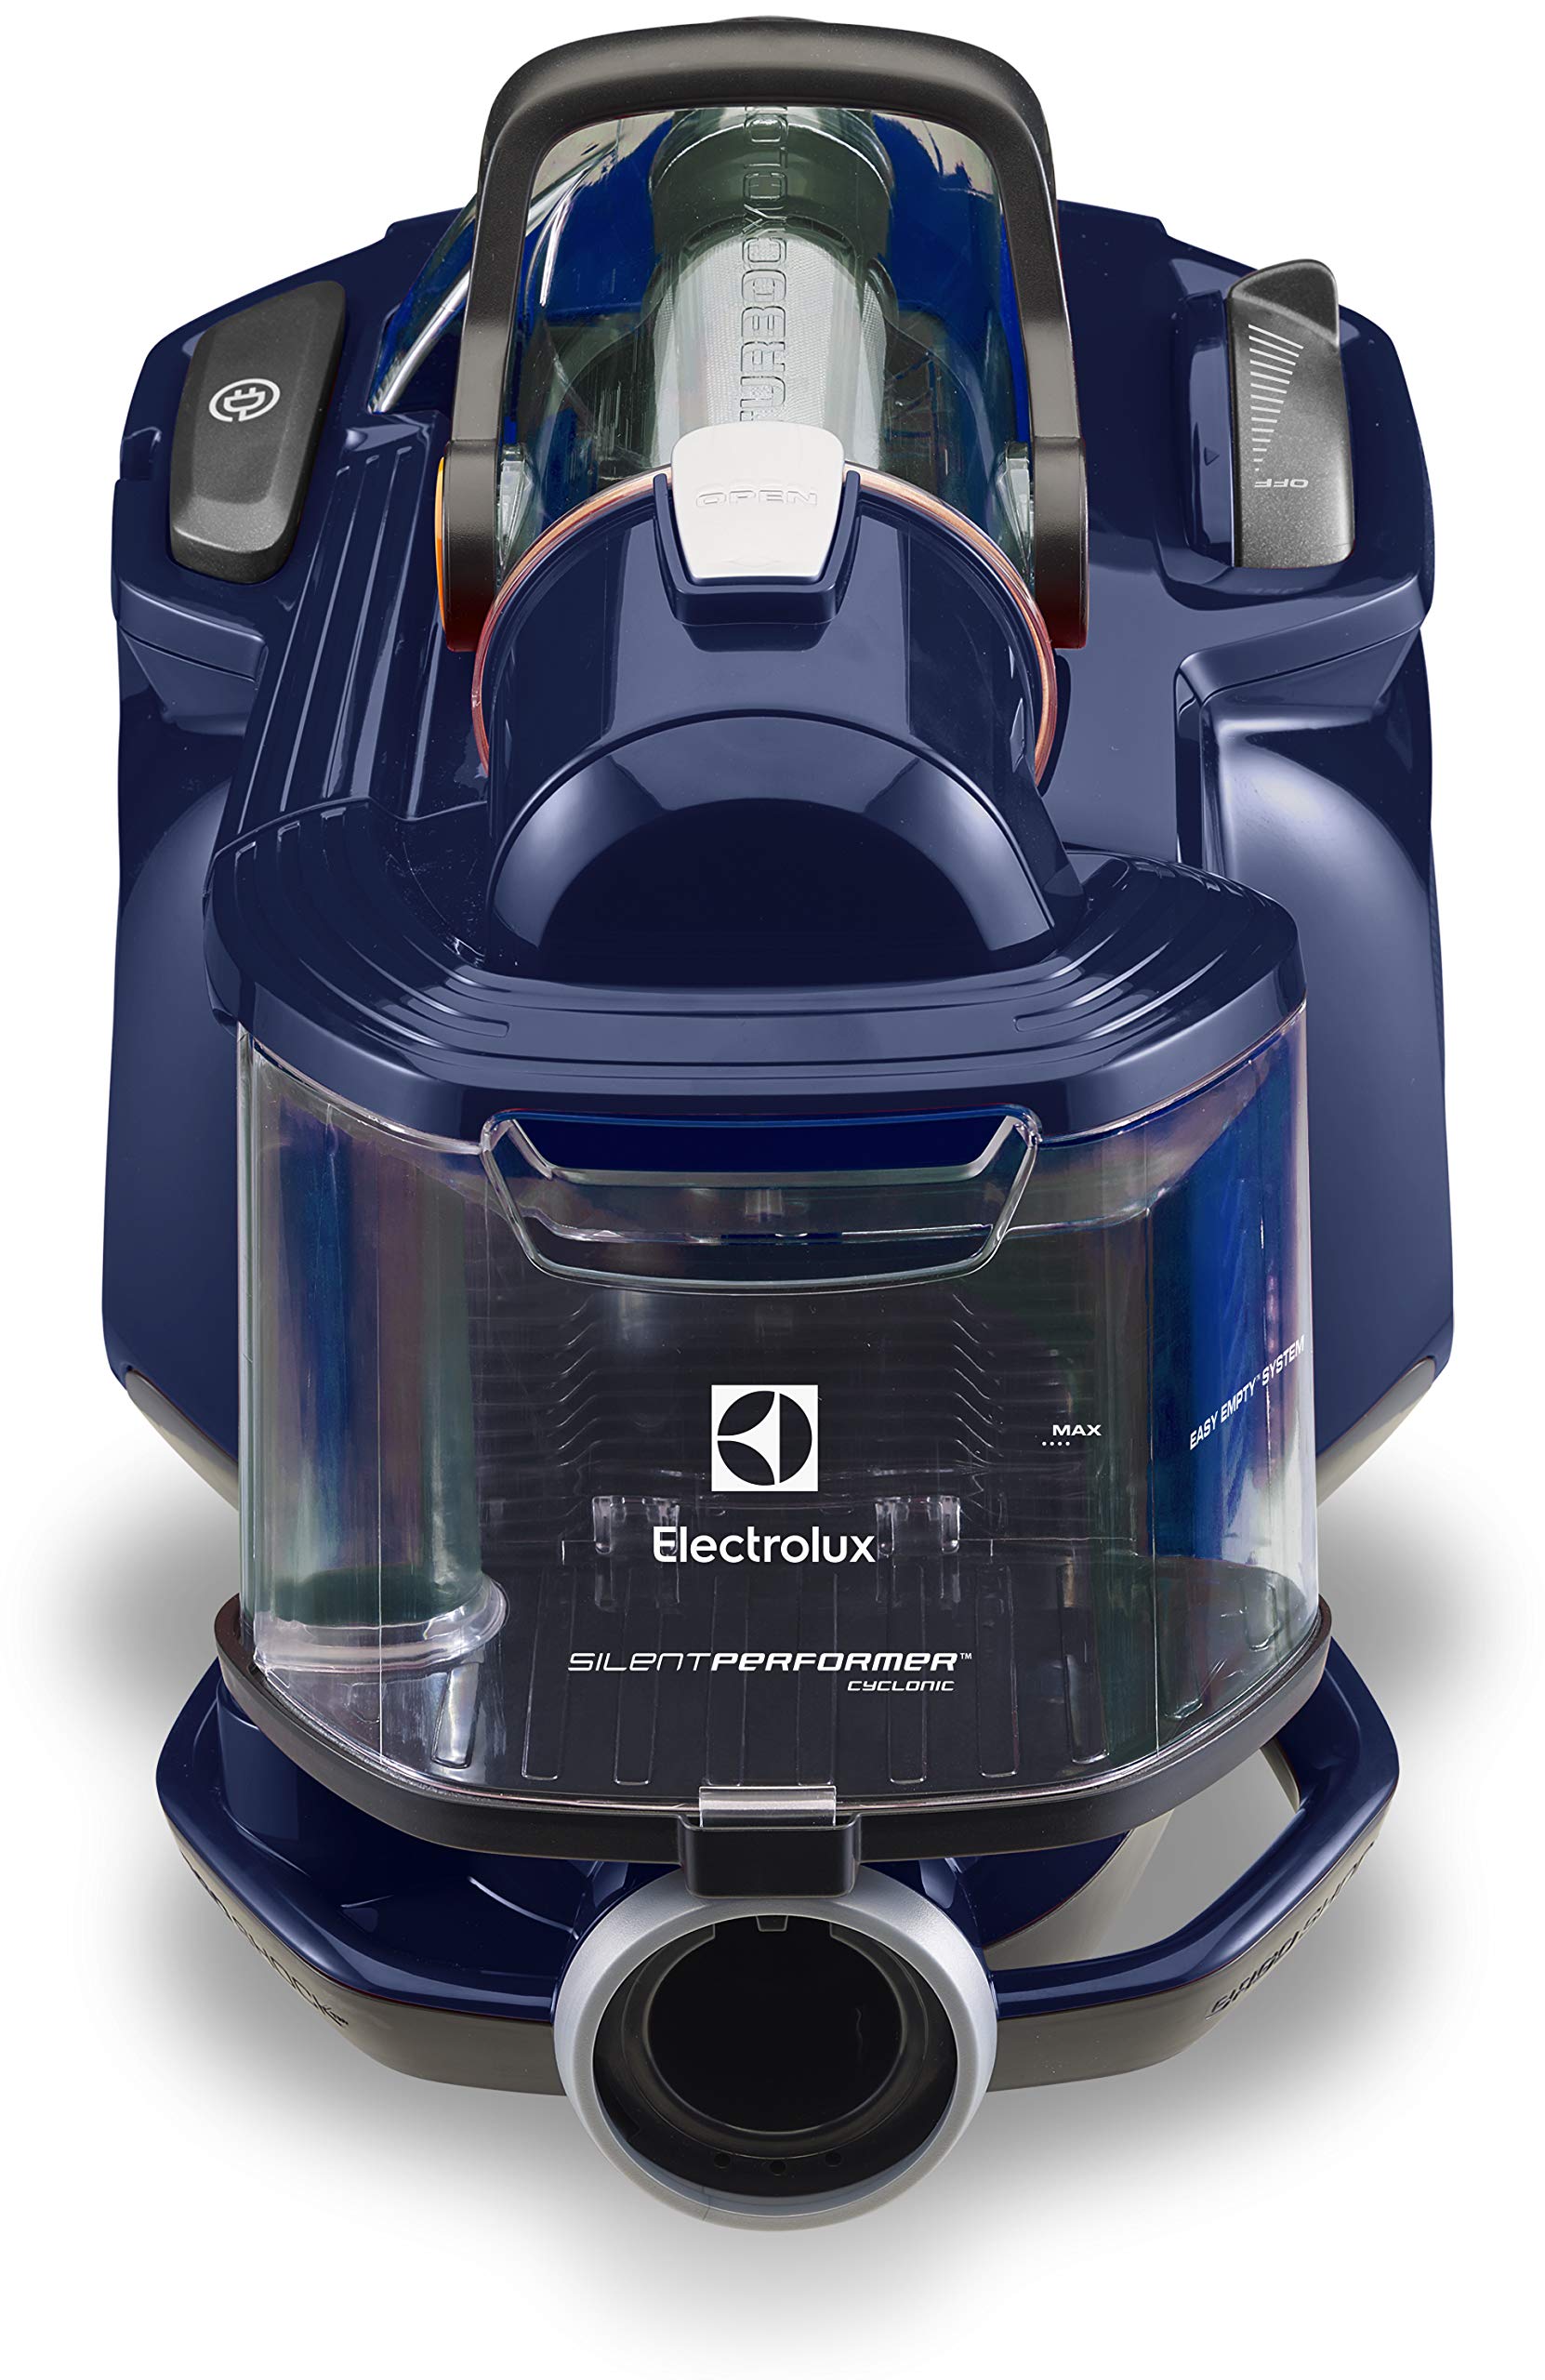 Electrolux 2200W Canister Bagless Vacuum Cleaner, Quiet Operation & Powerful Suction, Clean Air Filtration with Allergyplus Filter, Easy Empty, Best for Pet Hair, Carpet, Tile, Hard Floor, ZSPC2000(مجربة)